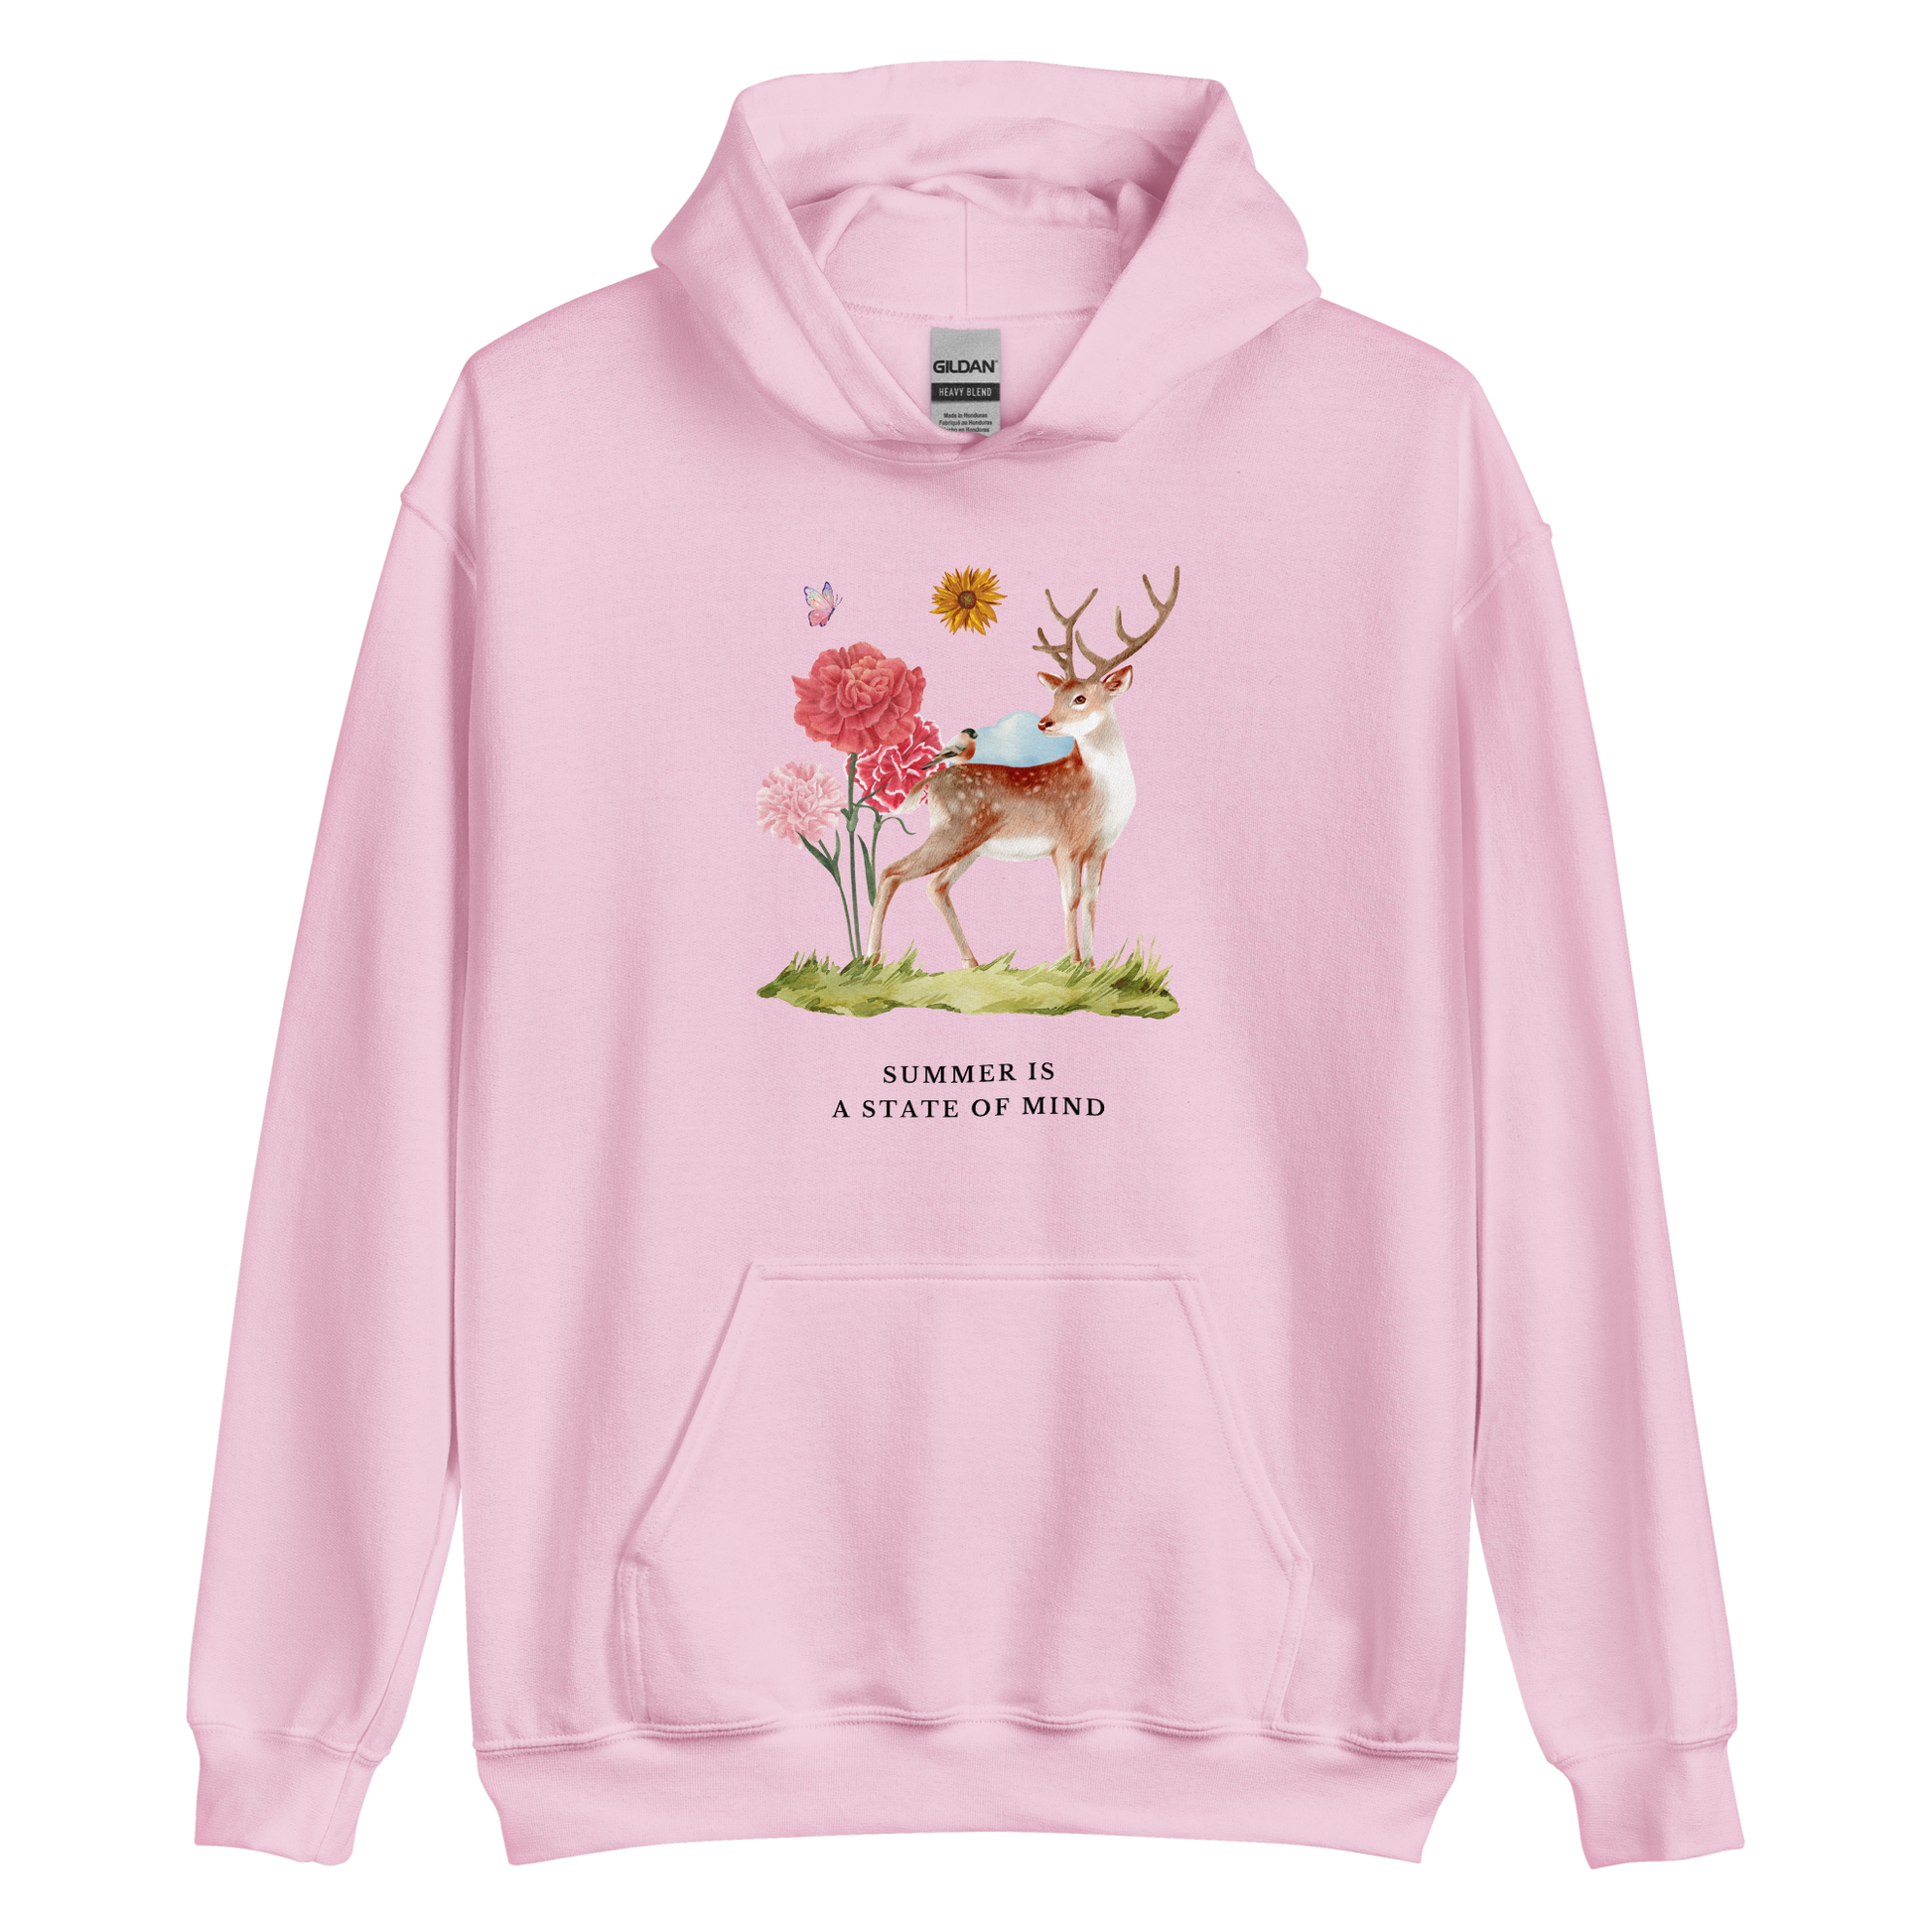 Light Pink Summer Is a State of Mind Hoodie Featuring a Summer Is a State of Mind graphic on the chest - Cute Graphic Summer Hoodies - Boozy Fox